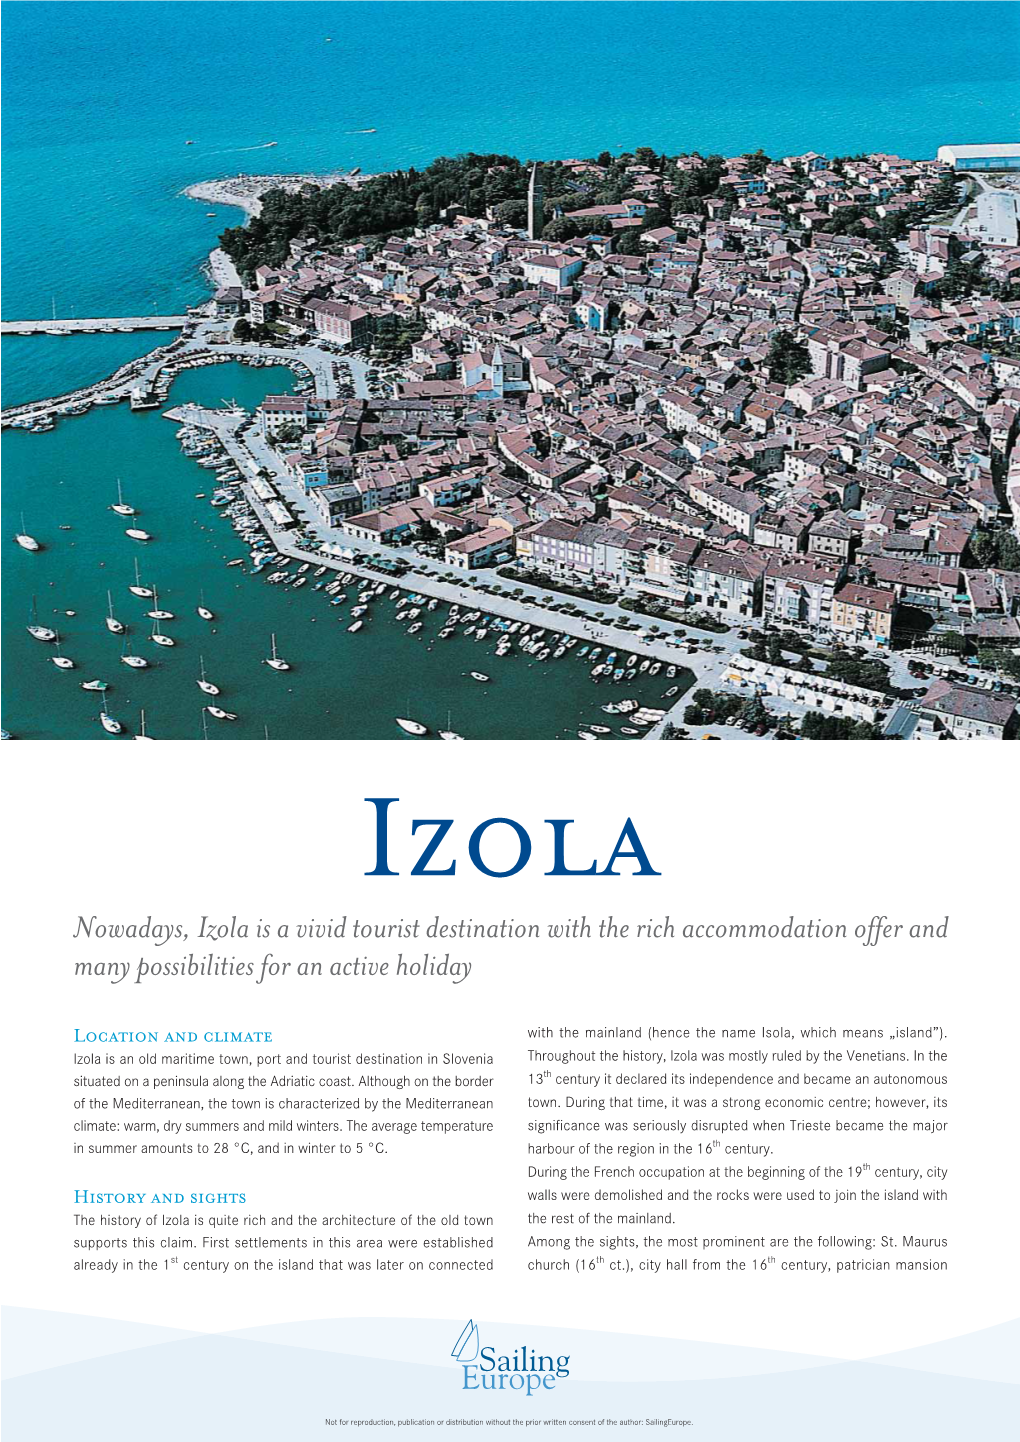 Izola Nowadays, Izola Is a Vivid Tourist Destination with the Rich Accommodation Offer and Many Possibilities for an Active Holiday